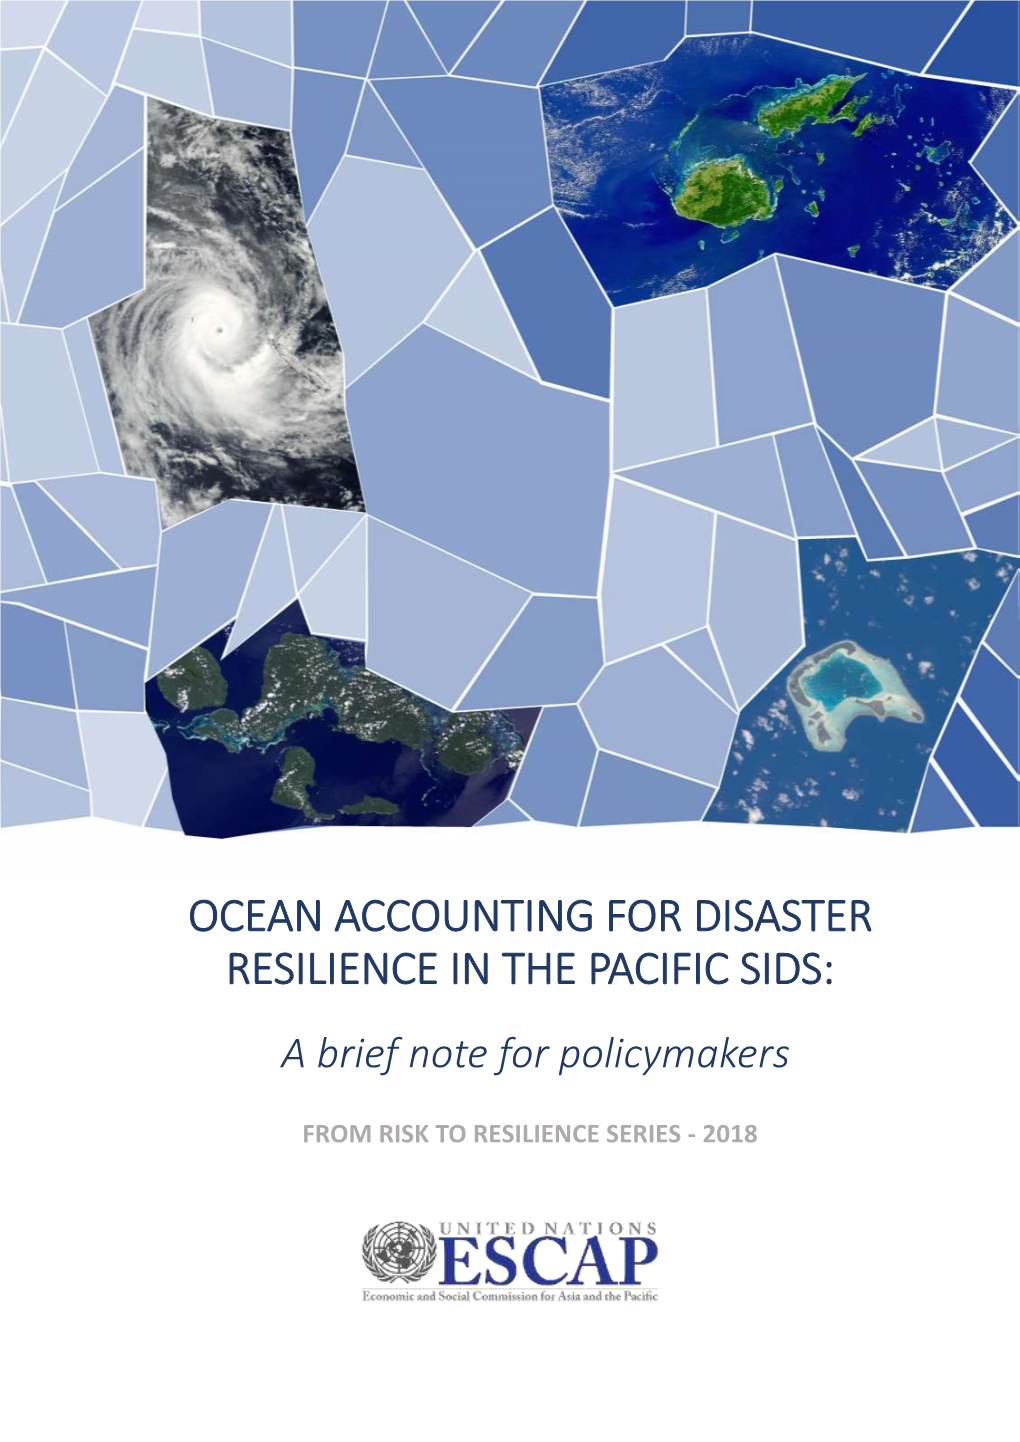 Ocean Accounting for Disaster Resilience in the Pacific Sids